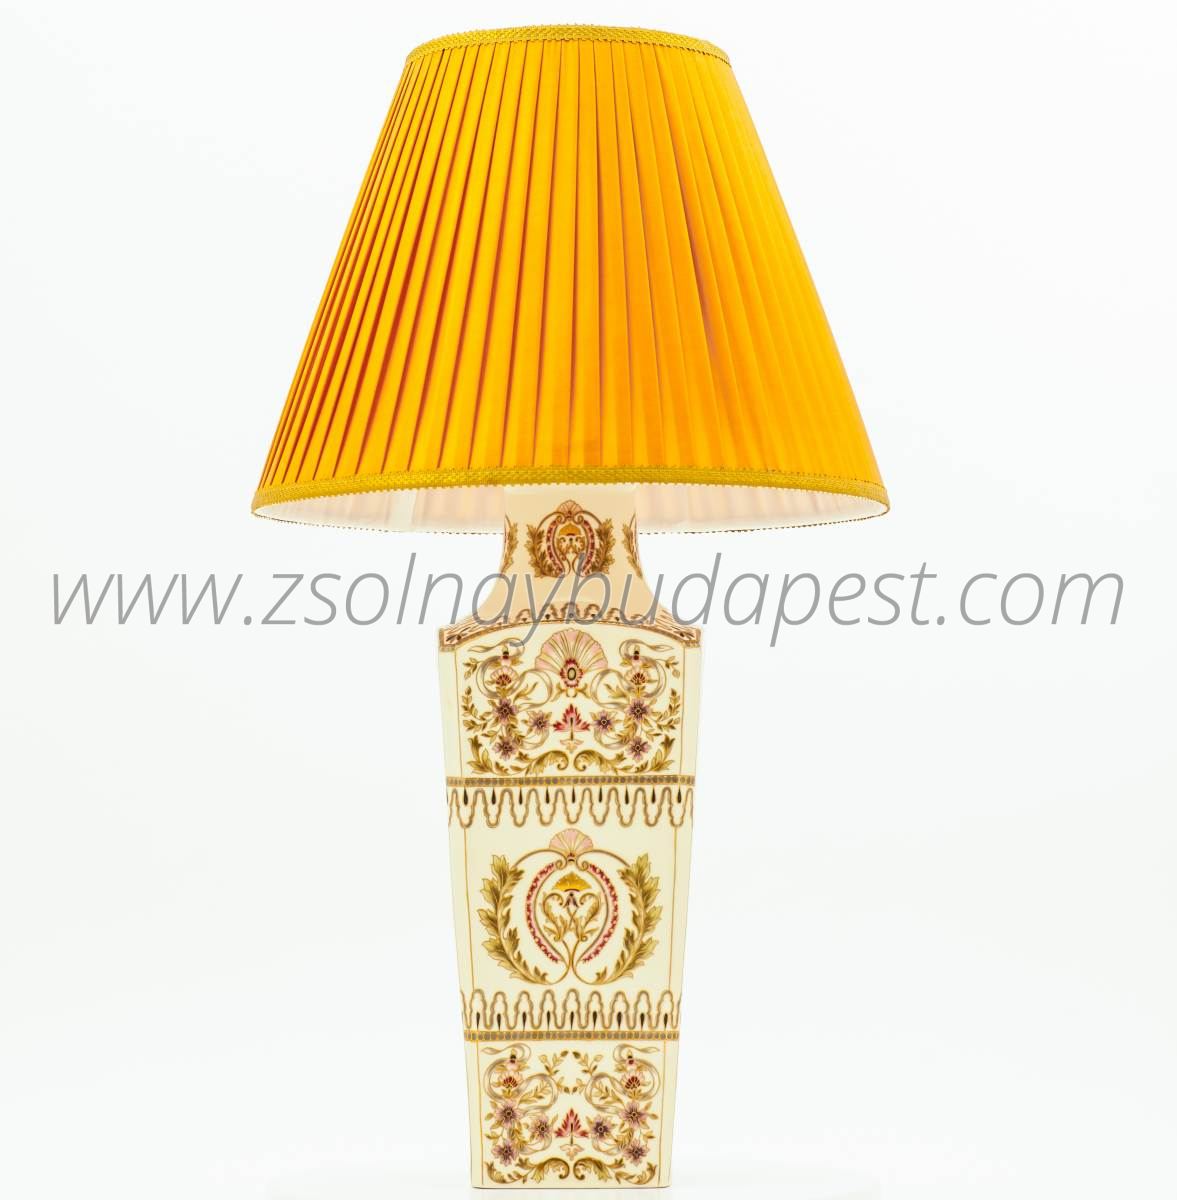 One of a kind  Imperial lamp